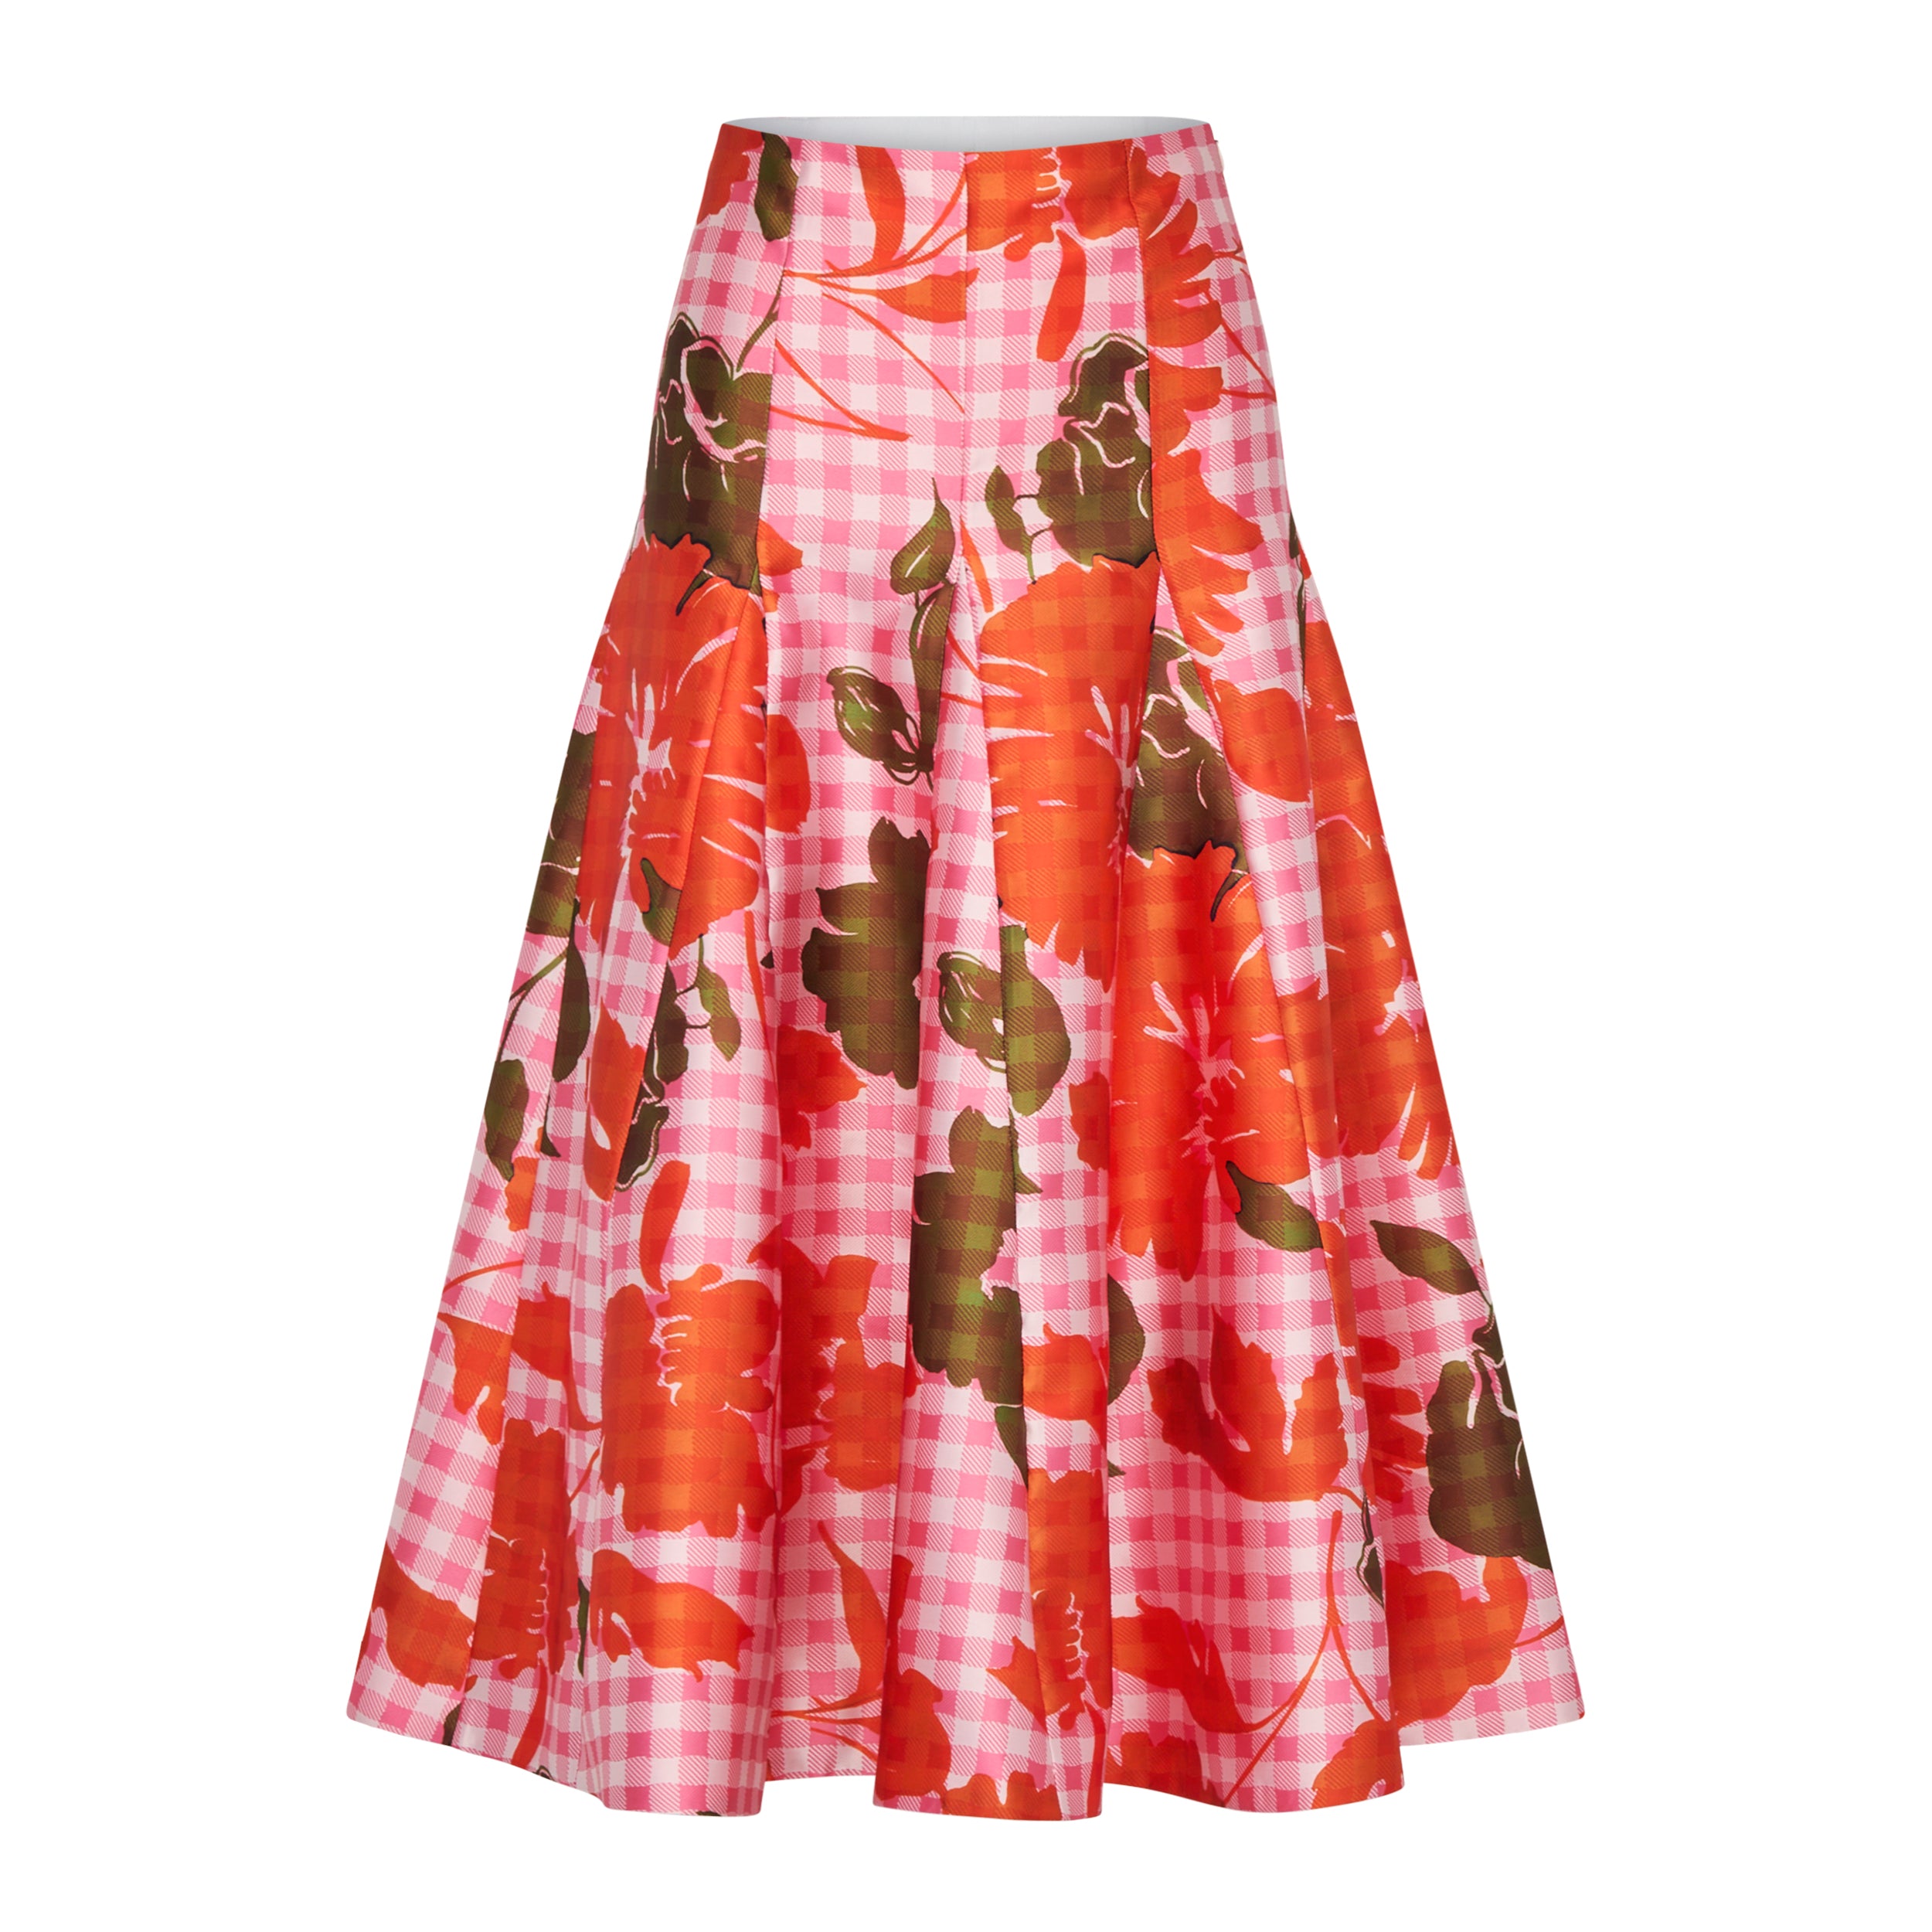 Maia Skirt in Floral Gingham Mikado